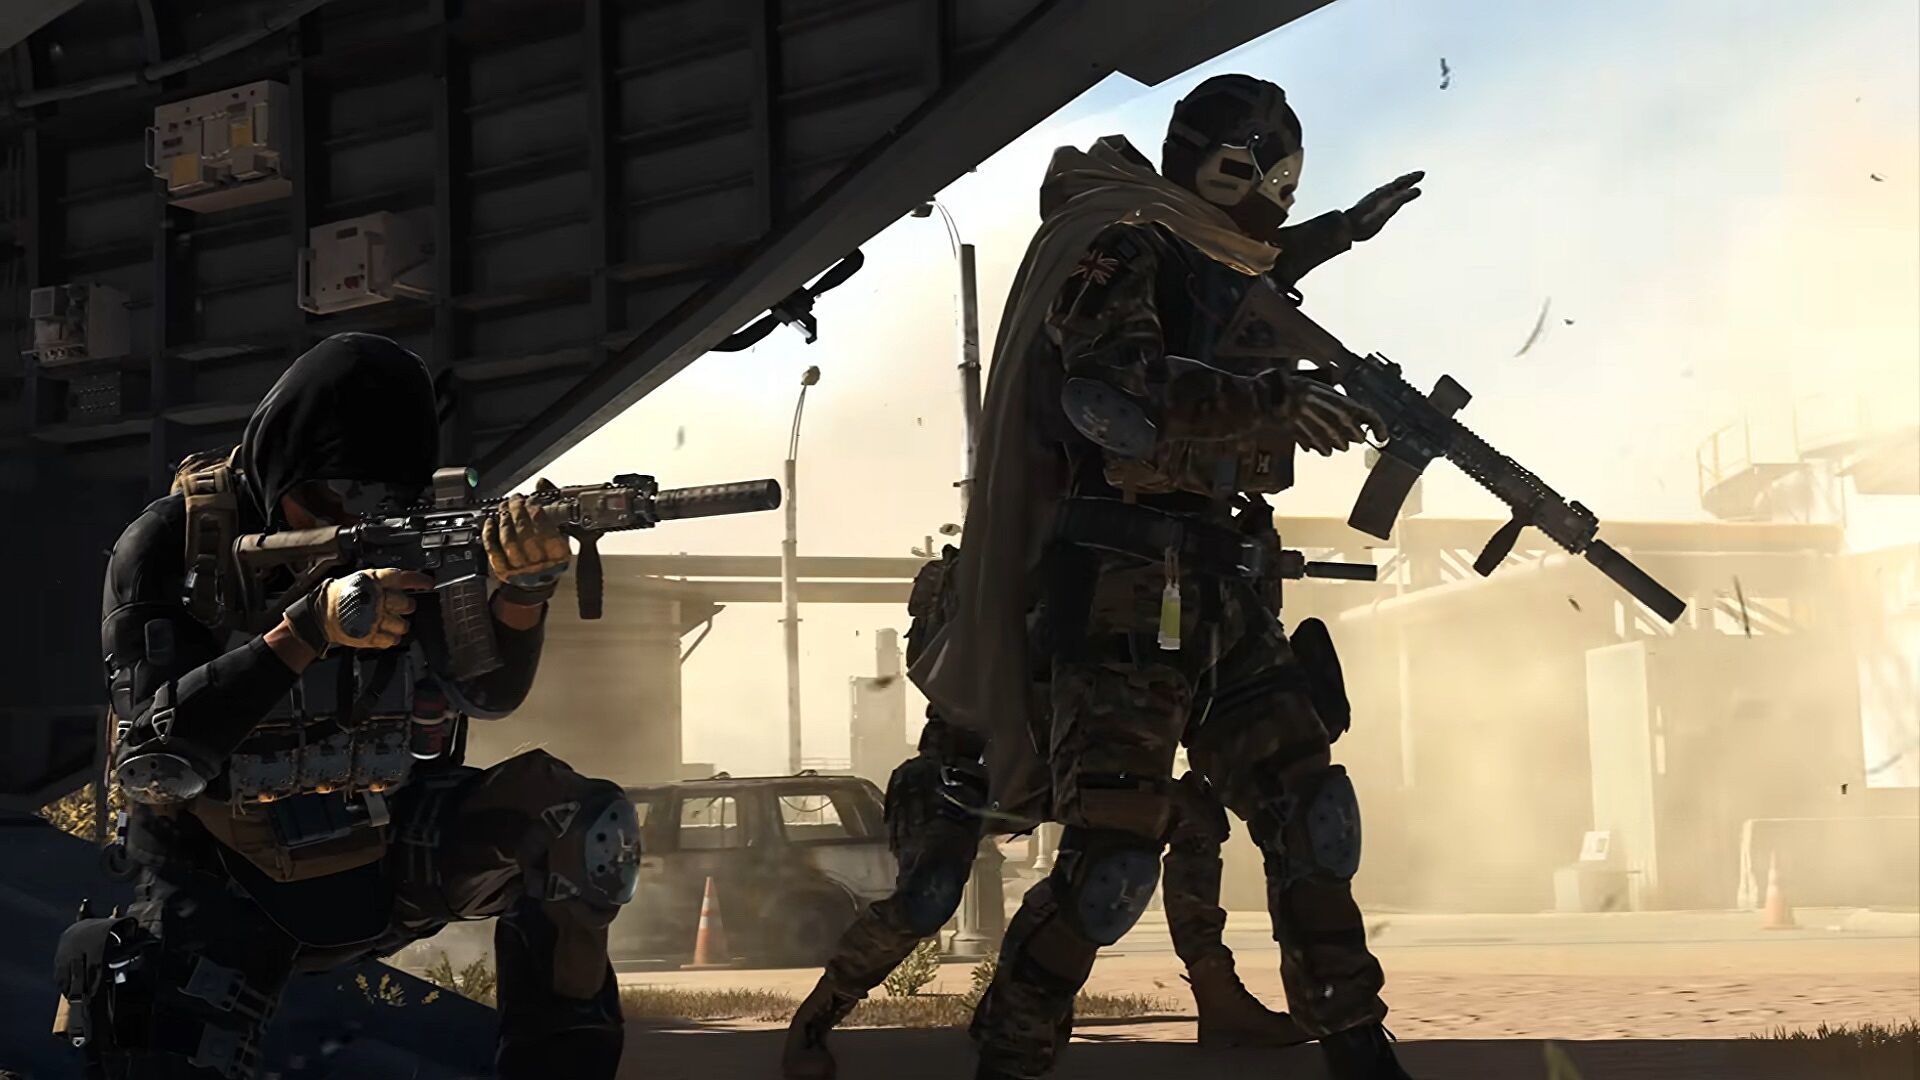 CoD Warzone sequel in development  What we know and want to see